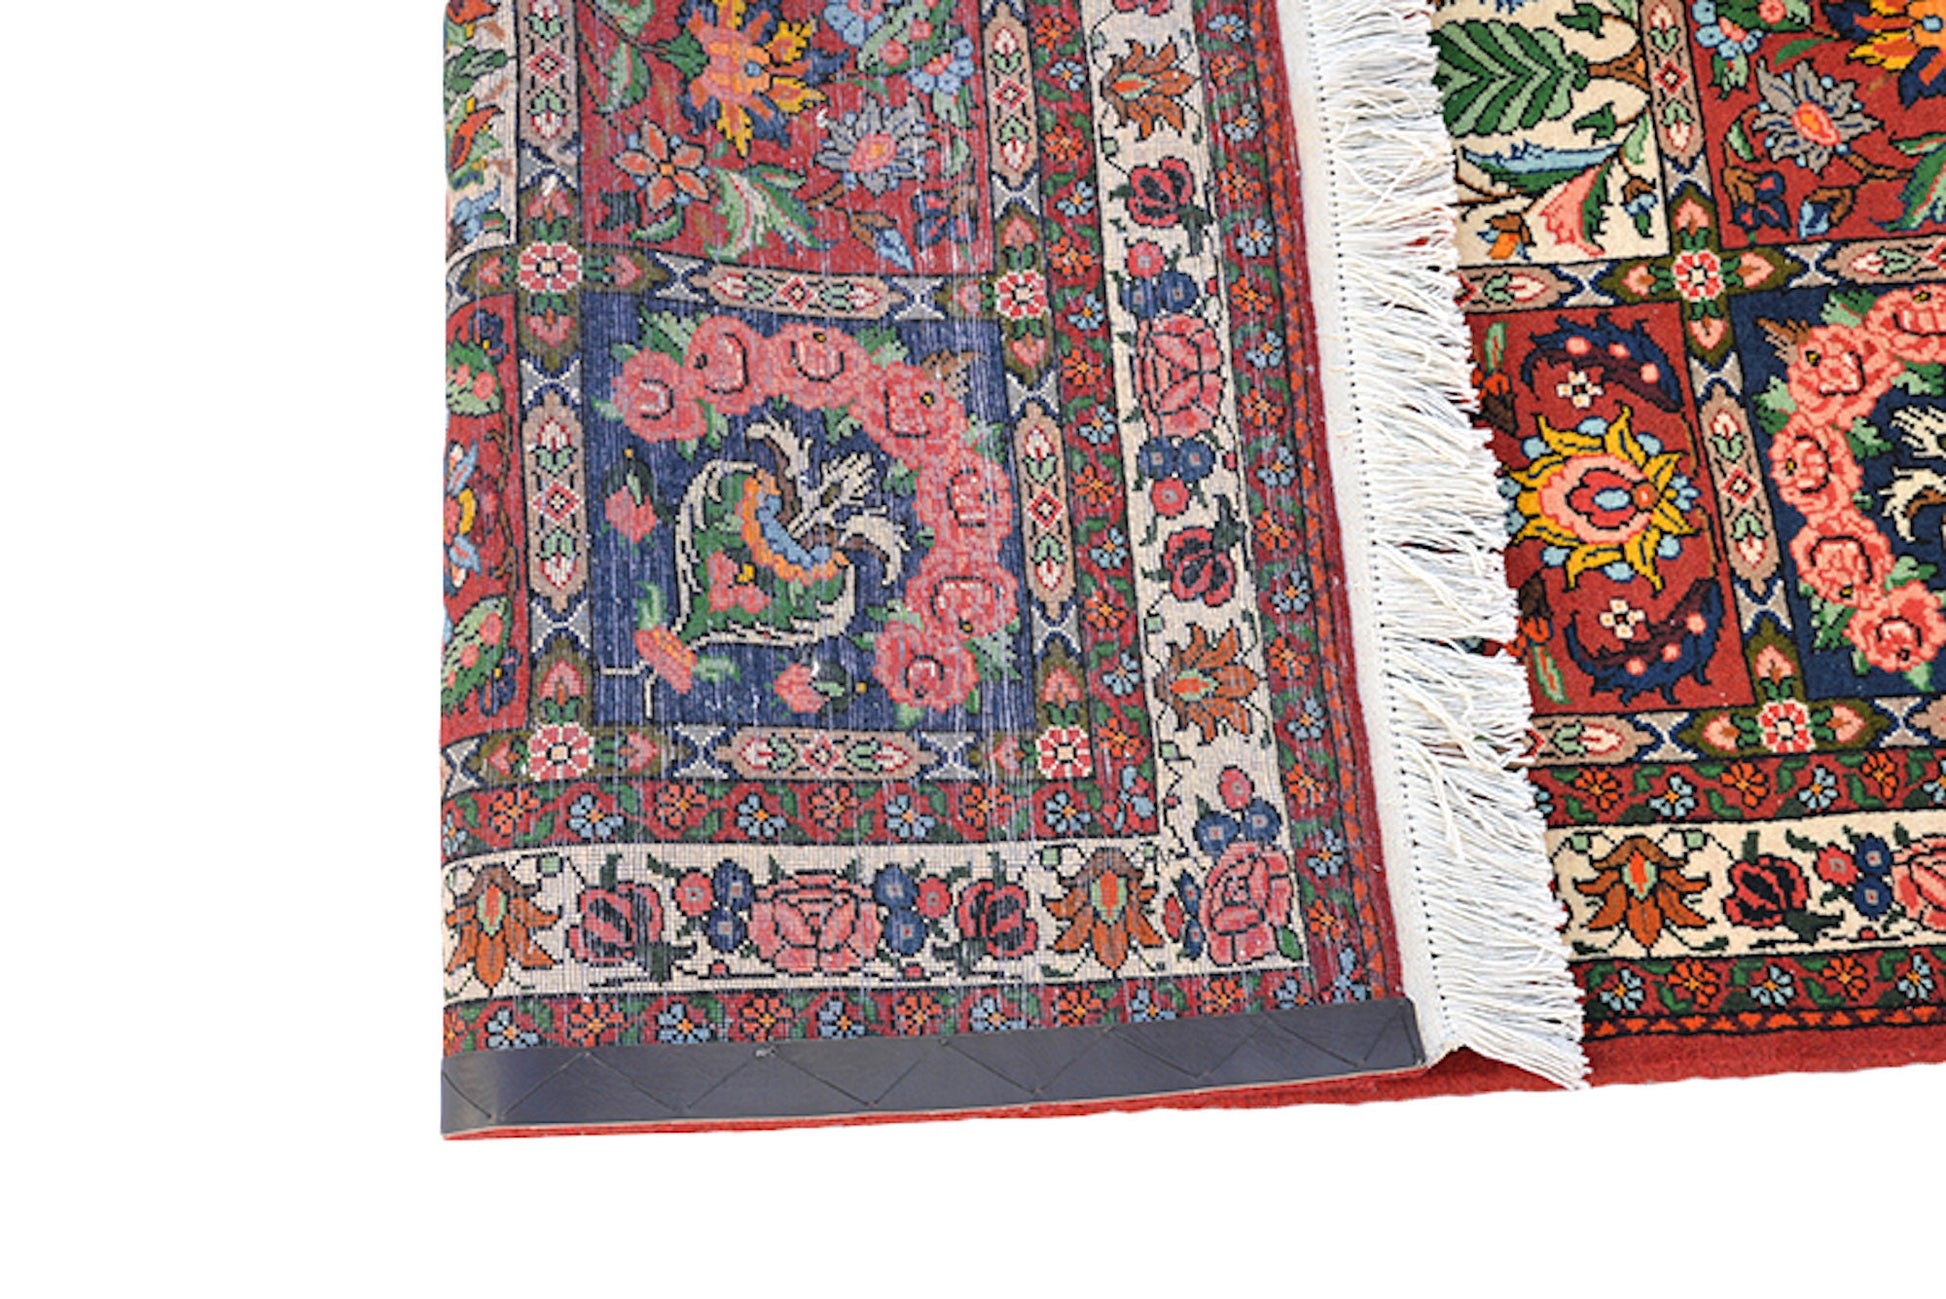 One of a kind Colorful Antique Rug | 3 x 5 Persian Caucasian Rug | Living Room Rug | Accent Handmade Wool Rug | Oriental Floral Pattern Rug